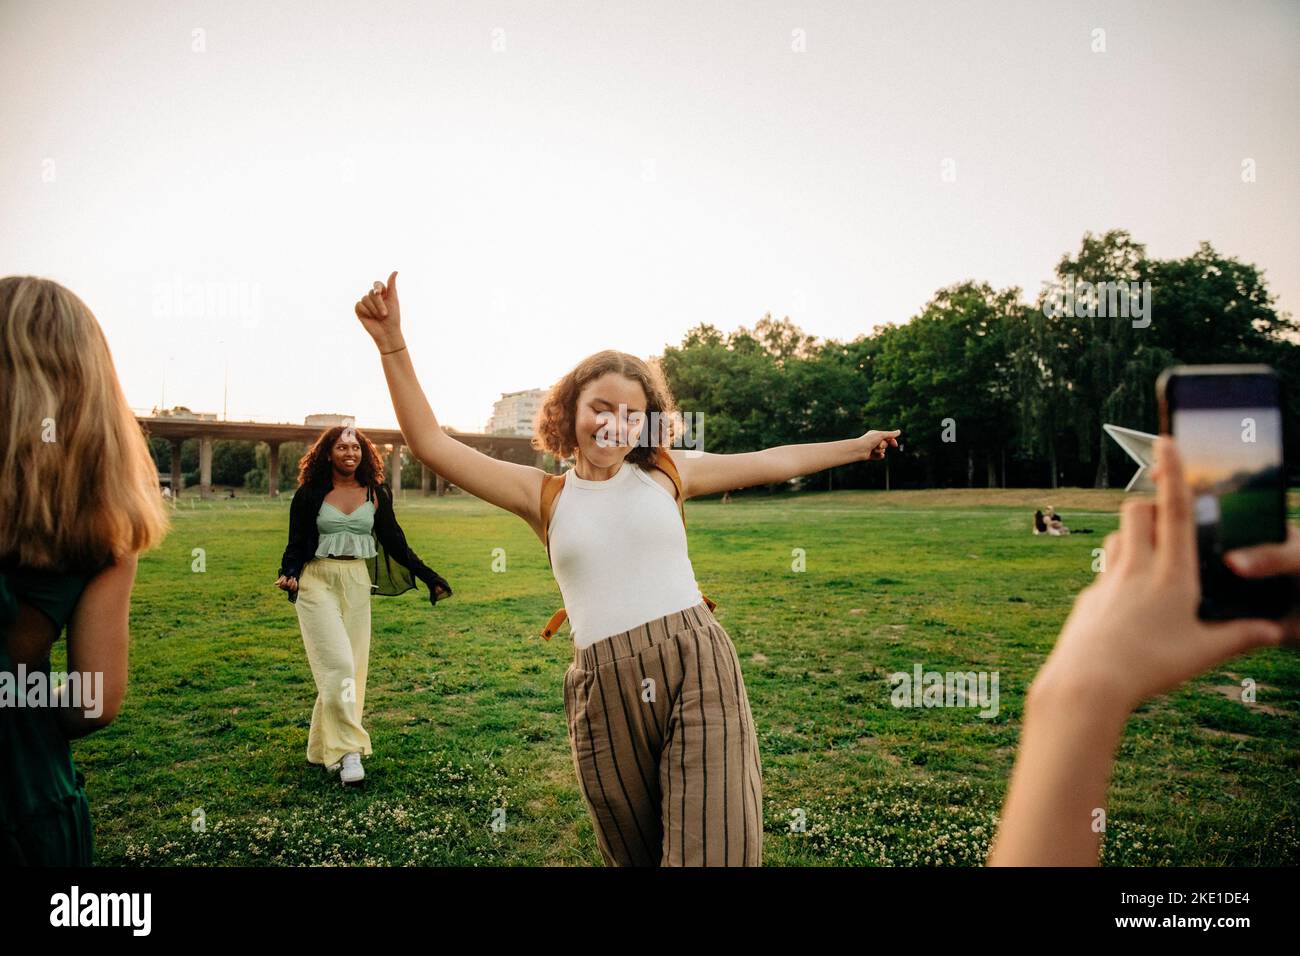 Teenage girl photographing carefree female friend dancing at park during sunset Stock Photo